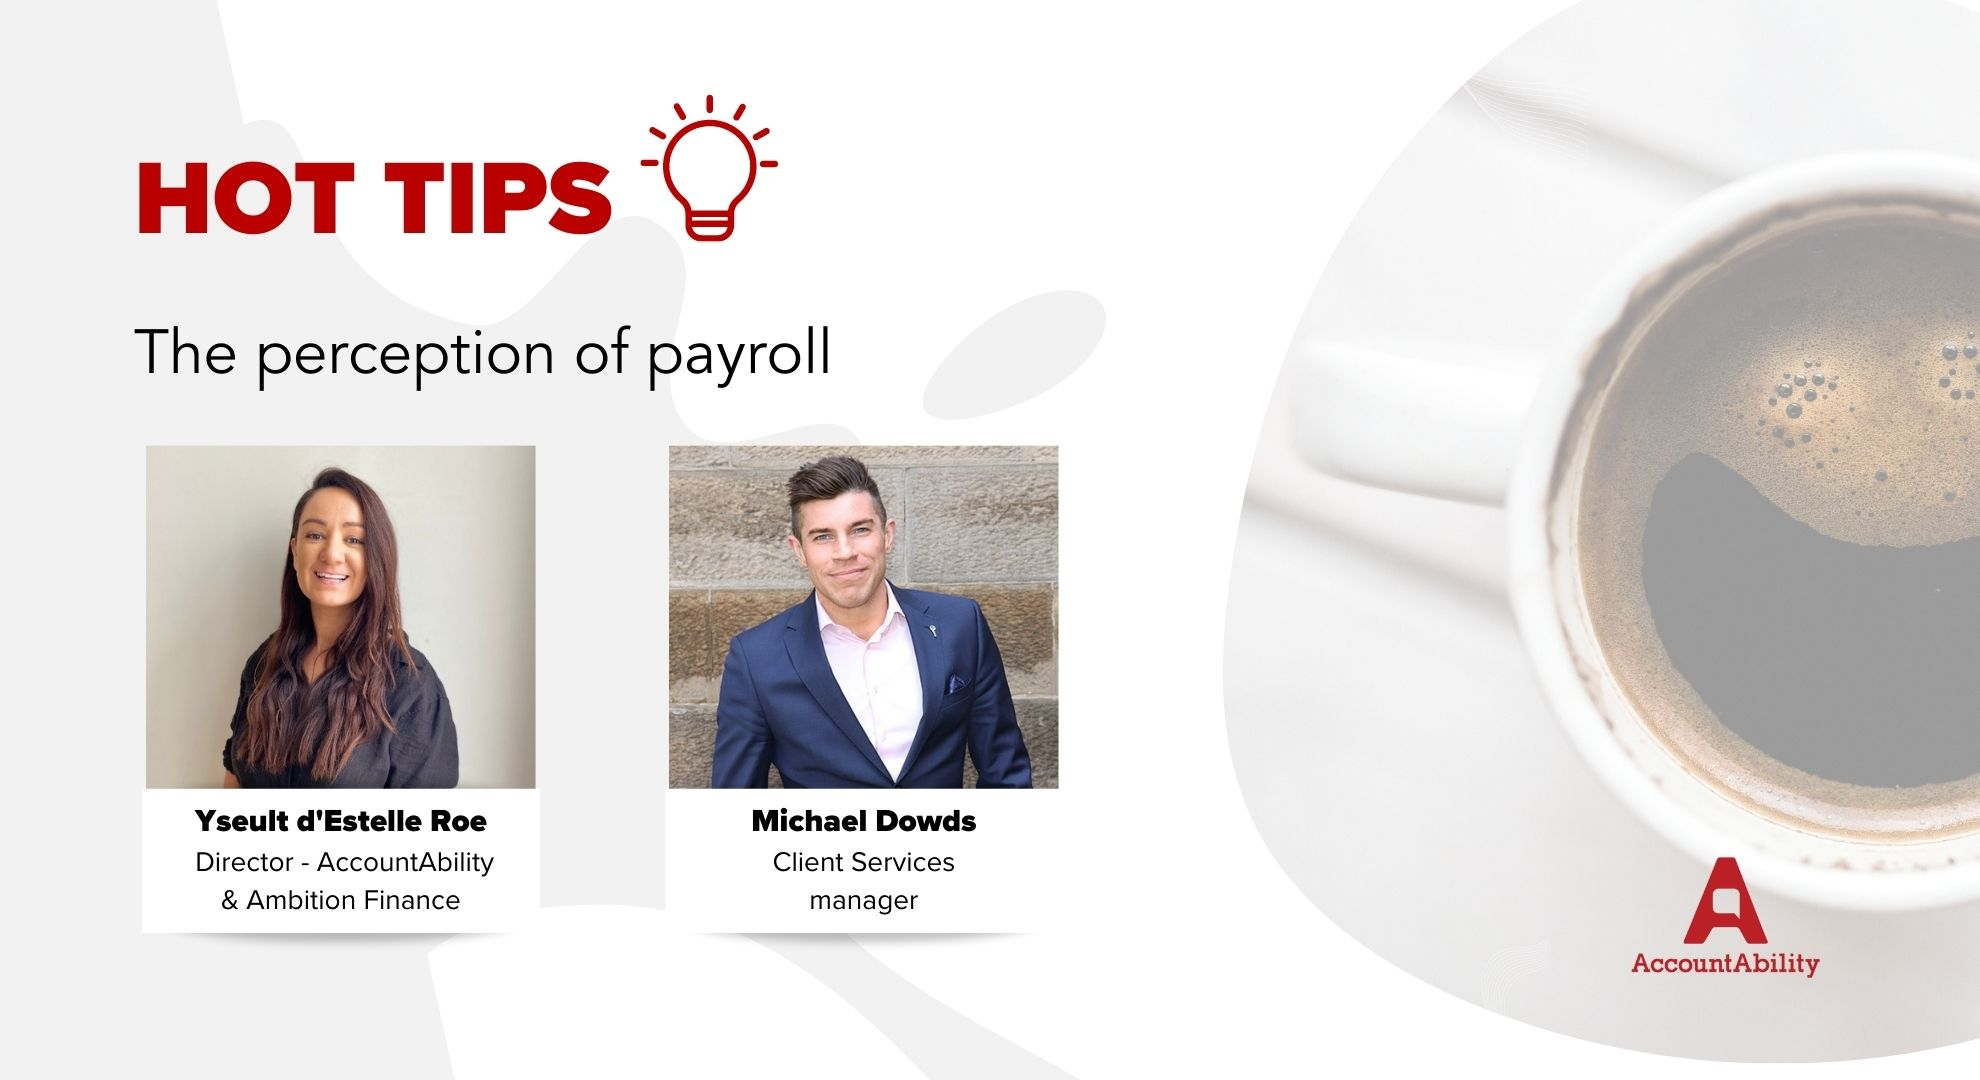 The perception of payroll services